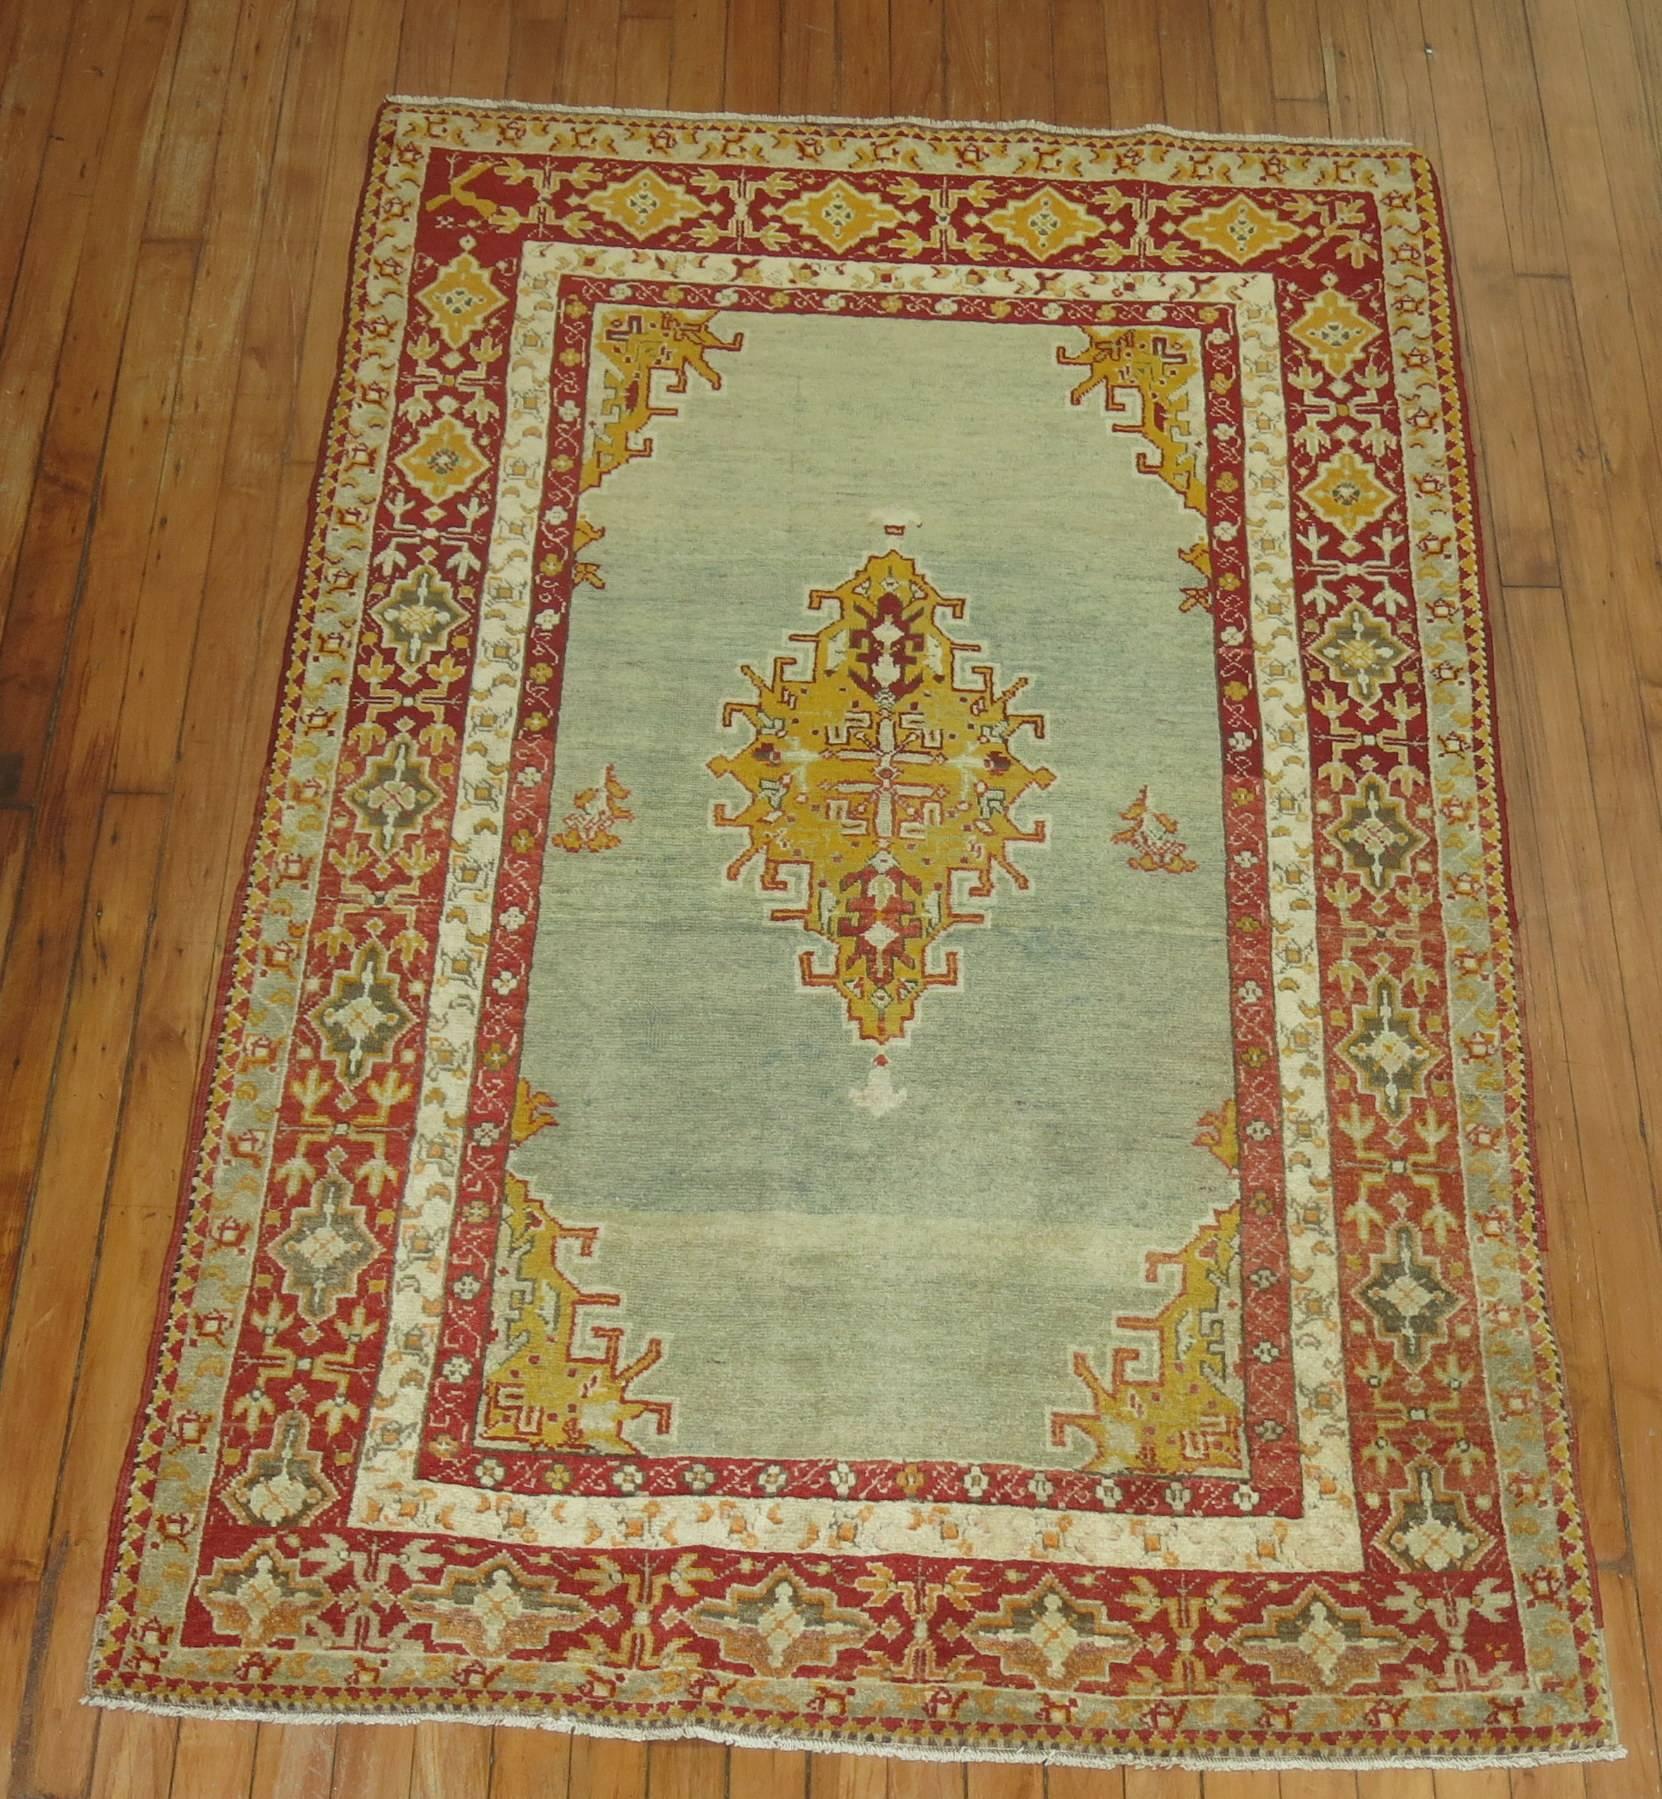 An early 20th century Turkish Sivas rug with an open field medallion pattern on a grayish blue field and cherry red predominant border. The rug is finely woven compared to other Turkish rugs of its type. Would make for a great wall covering as well.